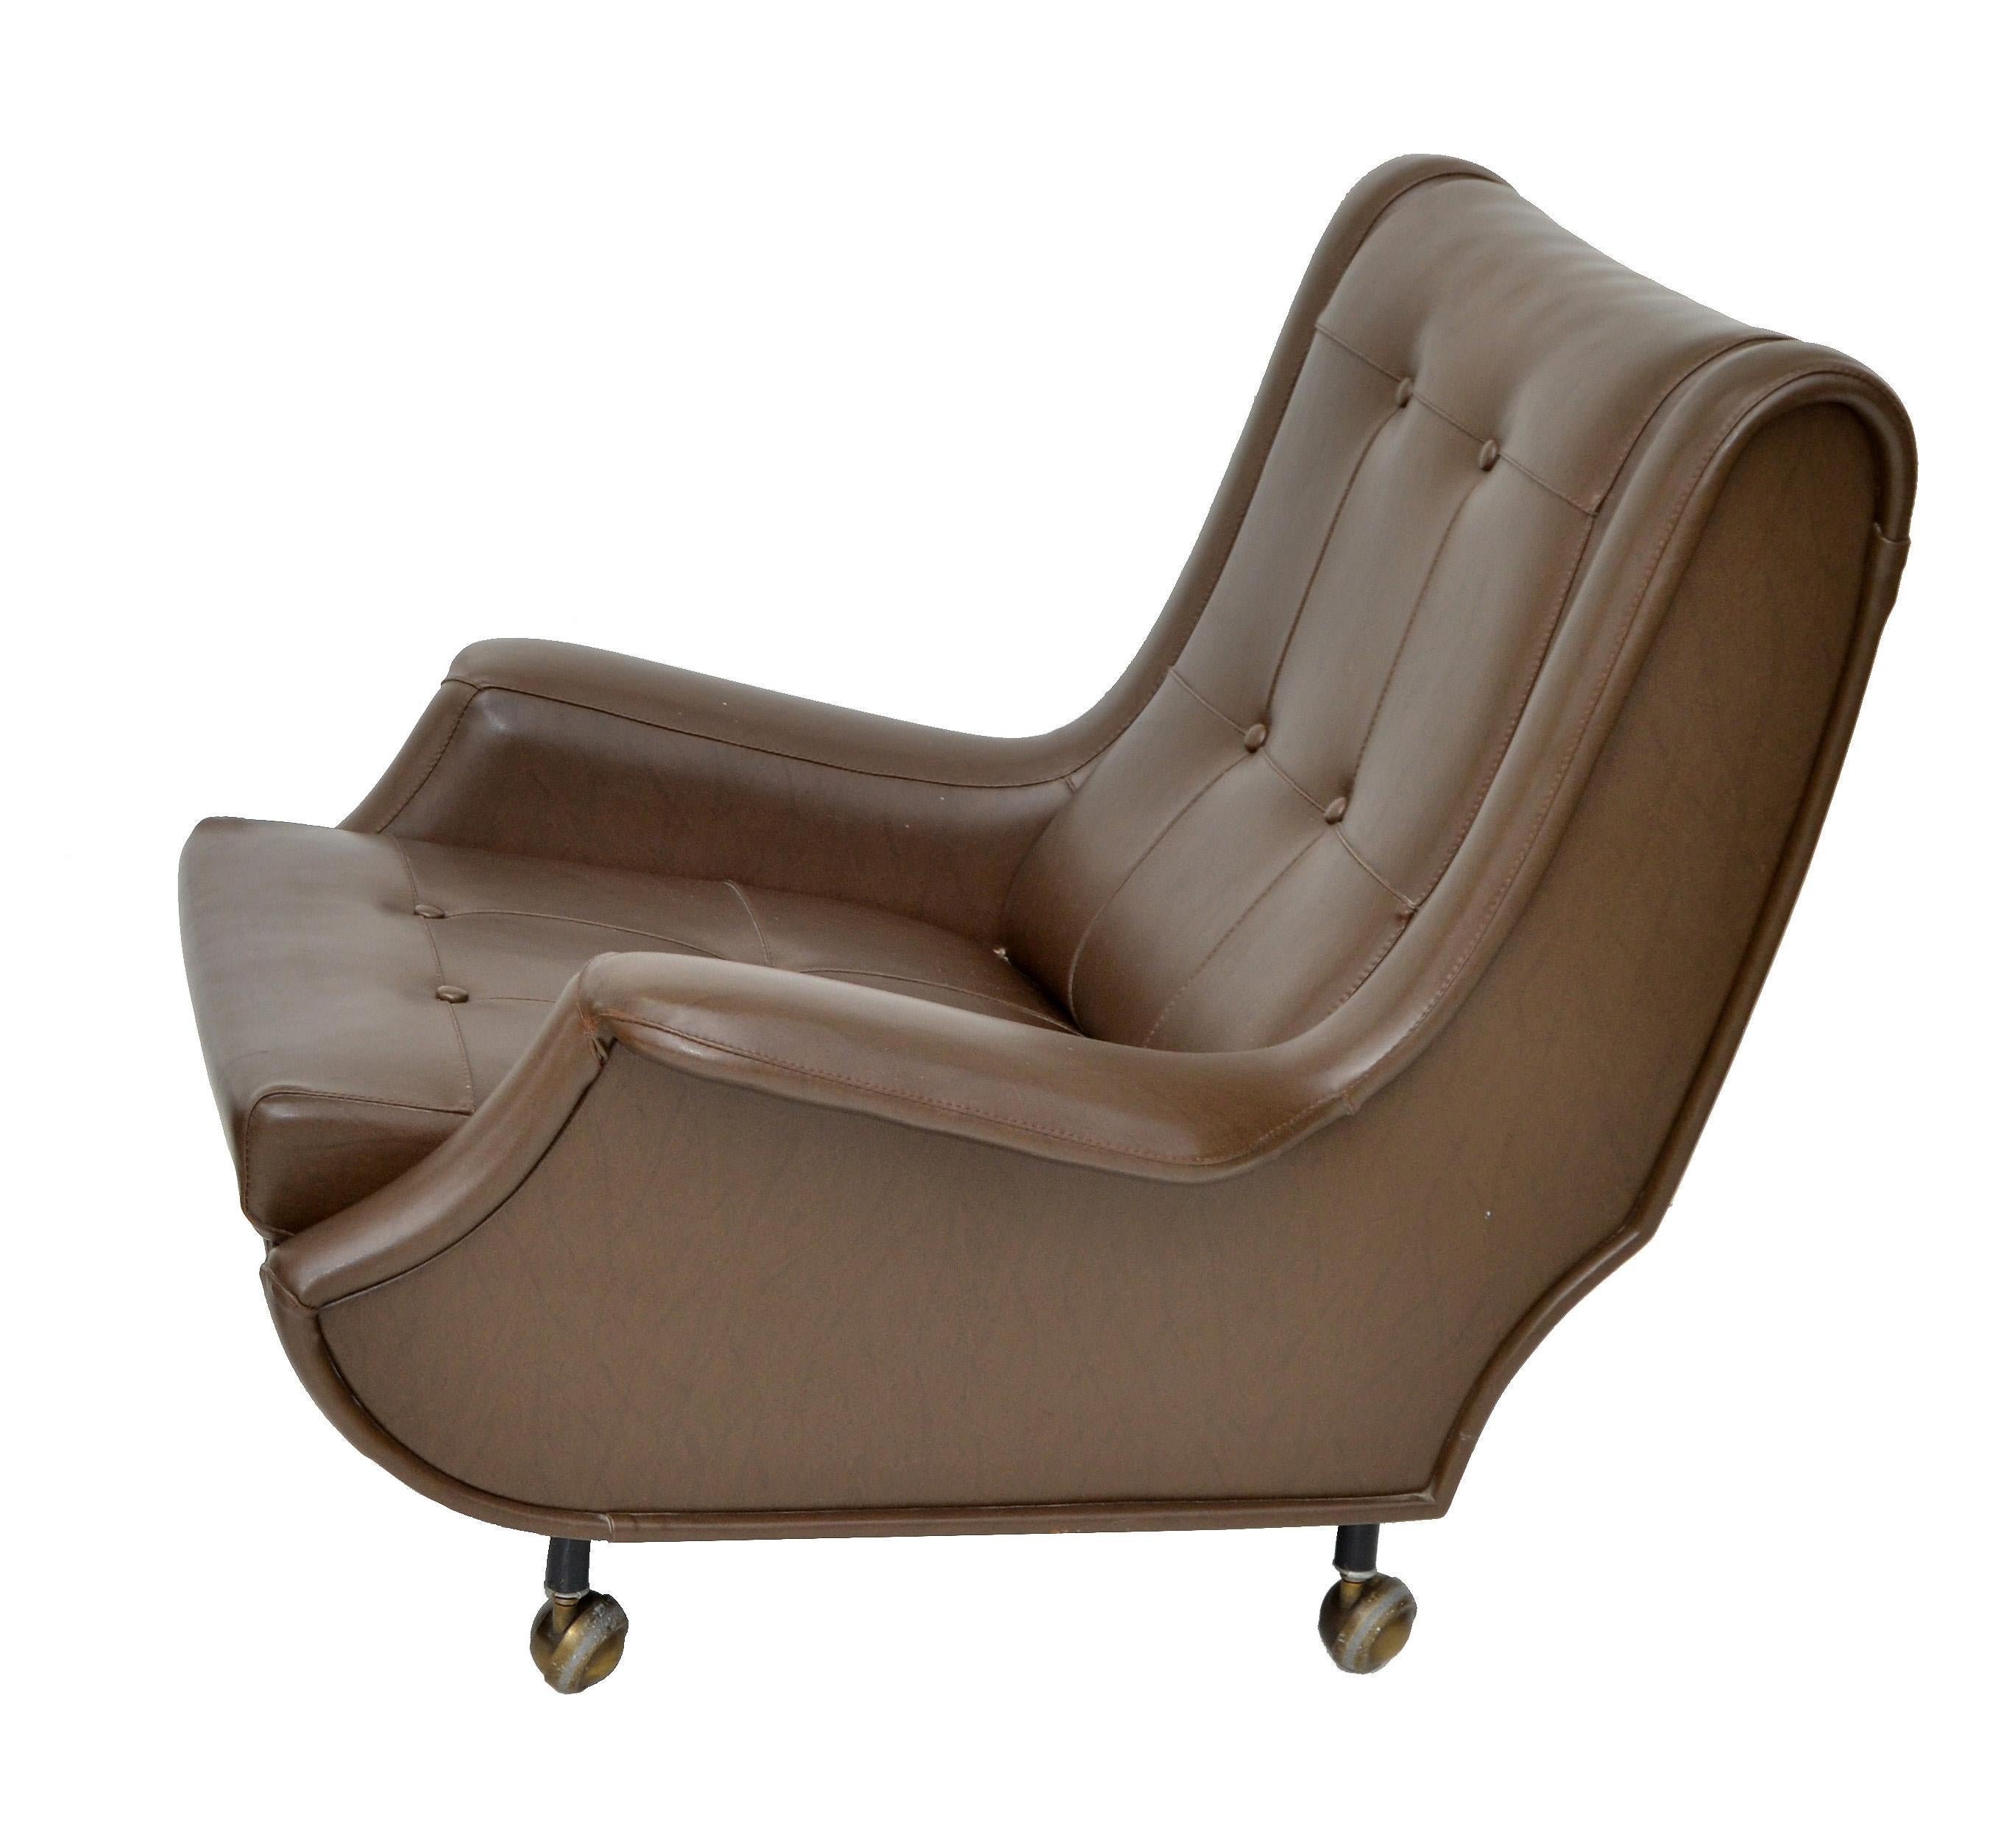 Exceptional Lounge chair designed by Marco Zanuso made by Arflex, Italy. 
Original brown leather Armchair on Brass casters.
Measures: Chair 33.25 H, 33 W, 27 D, 15.5 seat height, 21 W seat interior, Arm Height: 18.25 inches. 
In all original